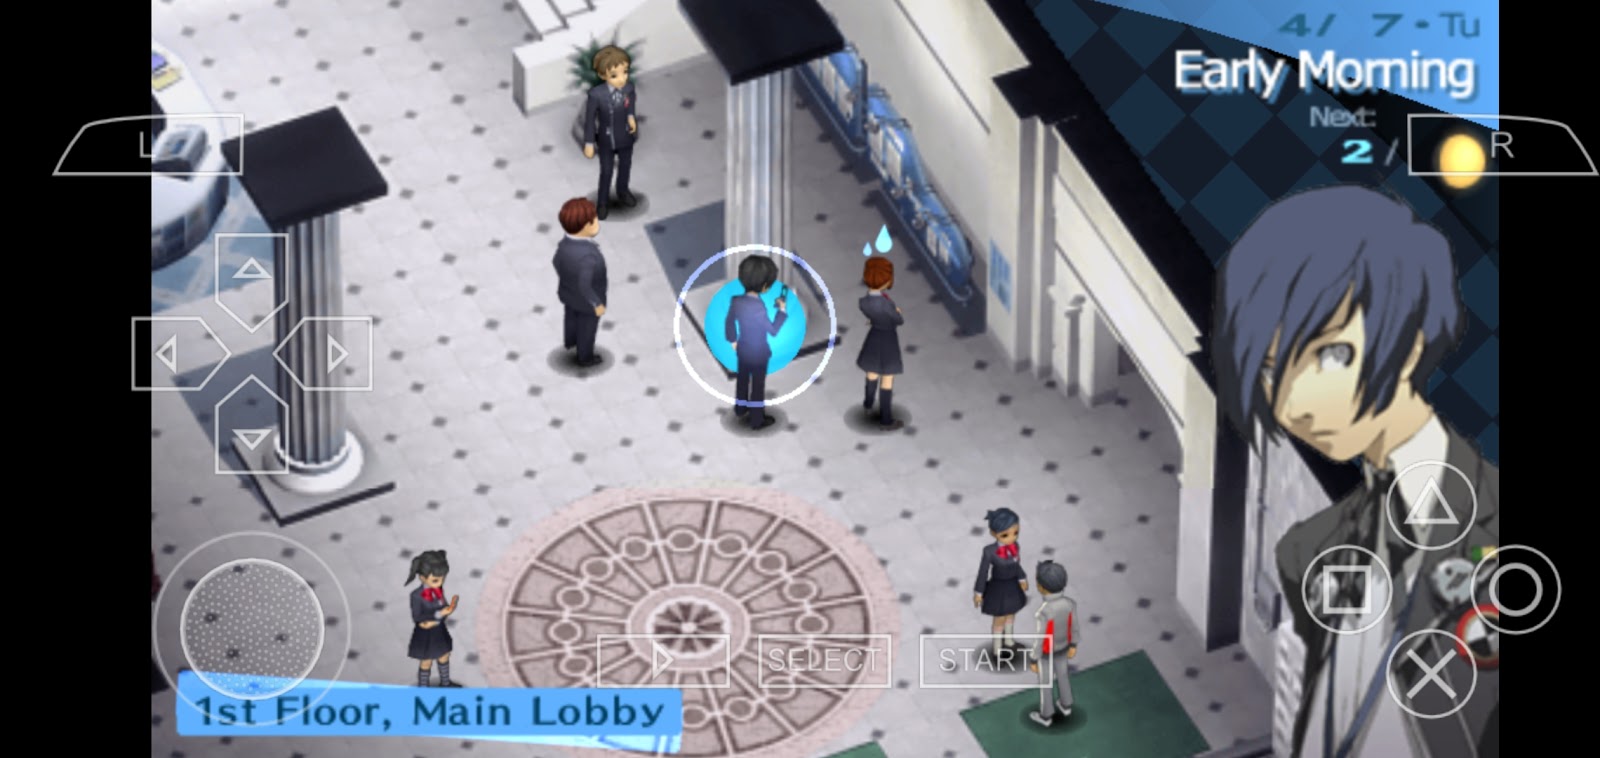 cheat persona 3 portable ppsspp cheats